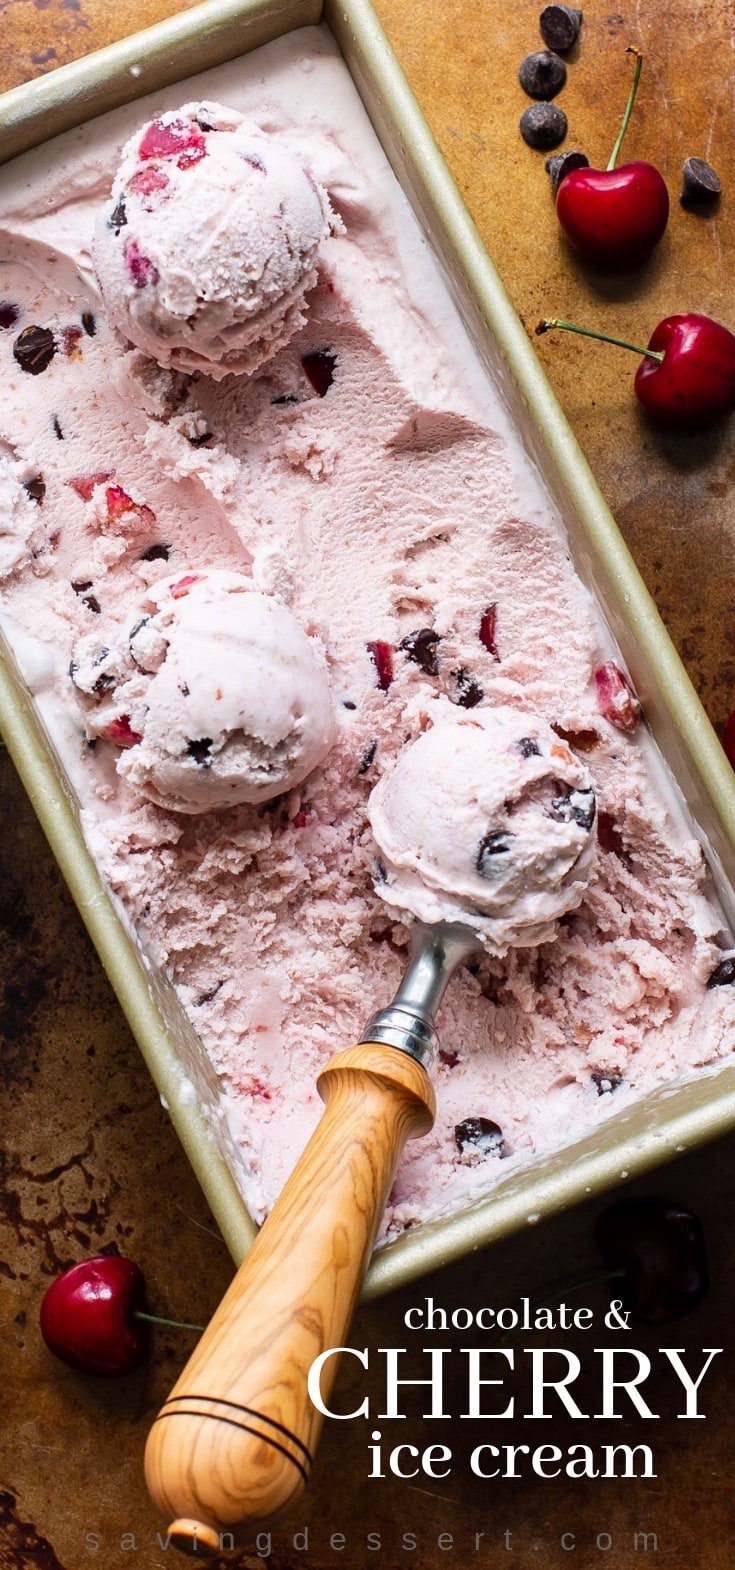 A baking pan filled with homemade fresh cherry ice cream with dark chocolate chips